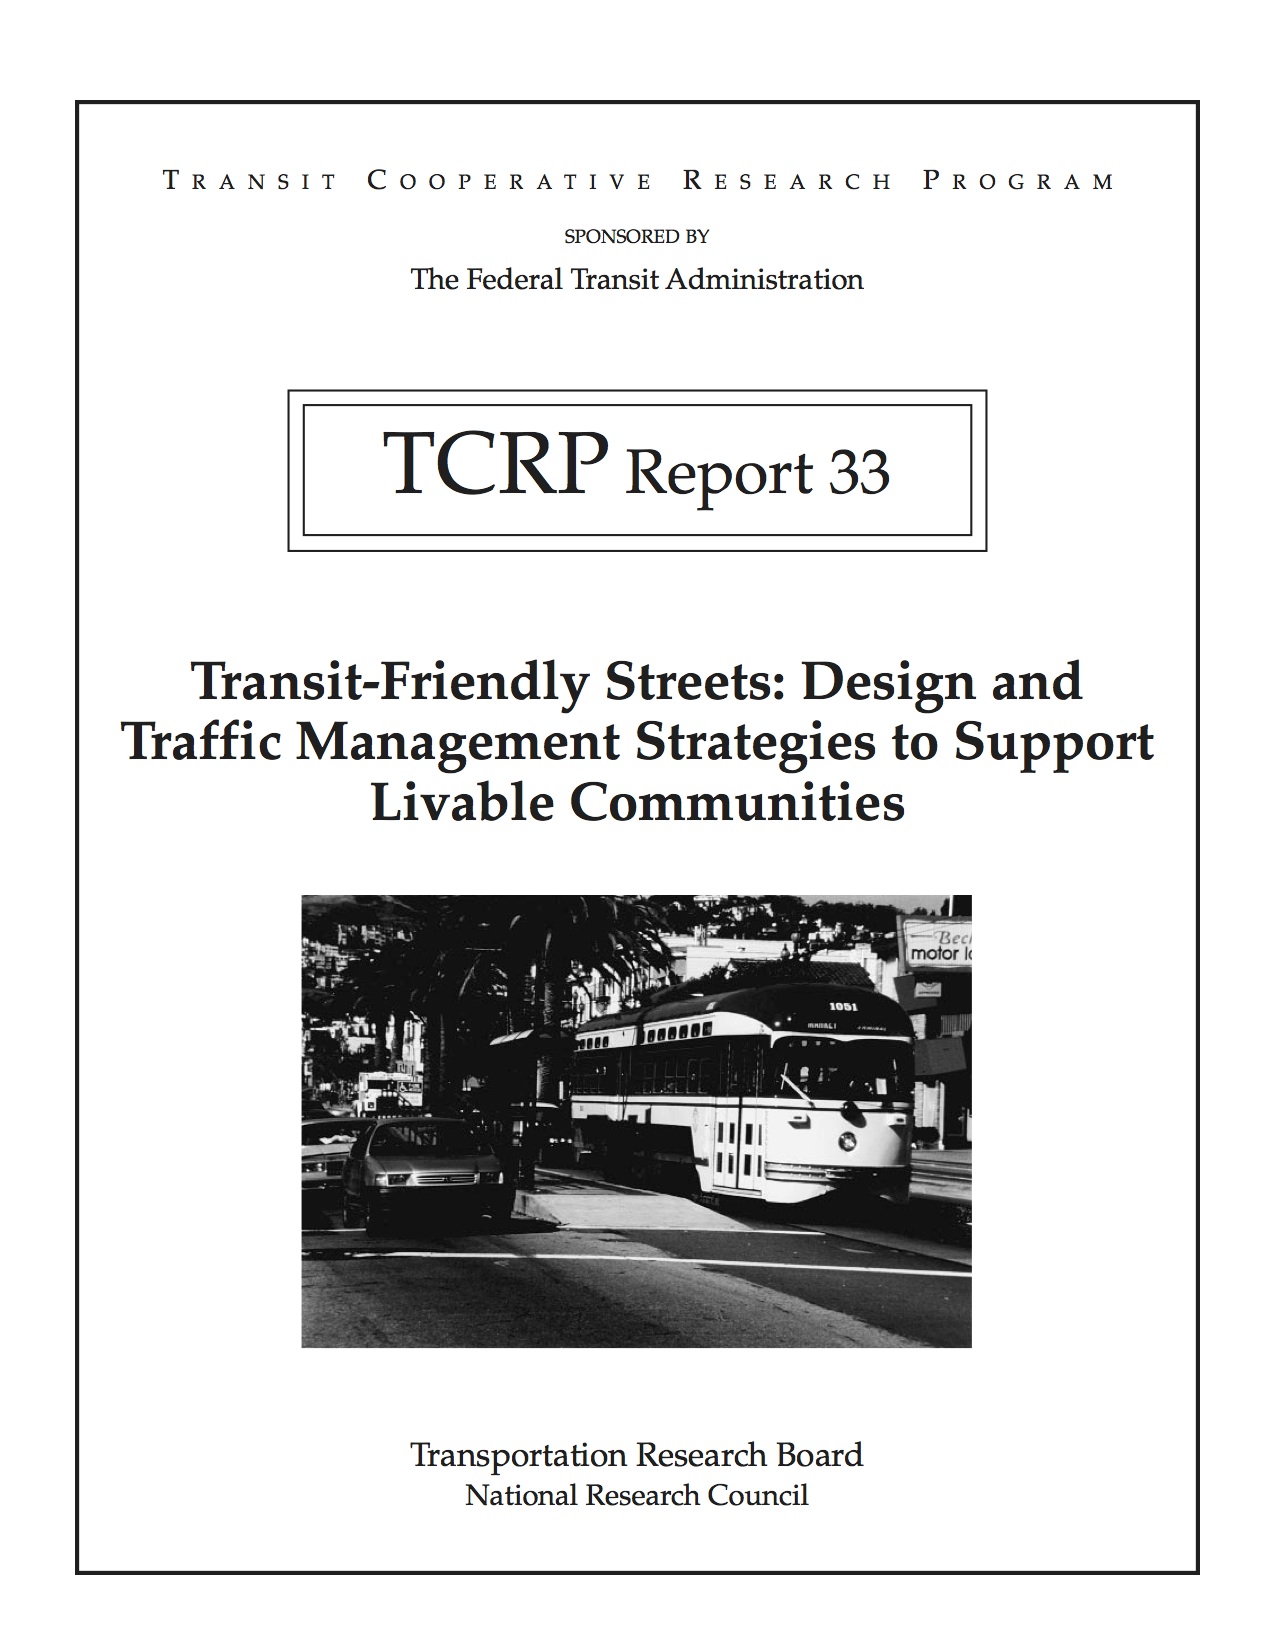 Transit-Friendly Streets: Design and Traffic Management Strategies to Support Livable Communities